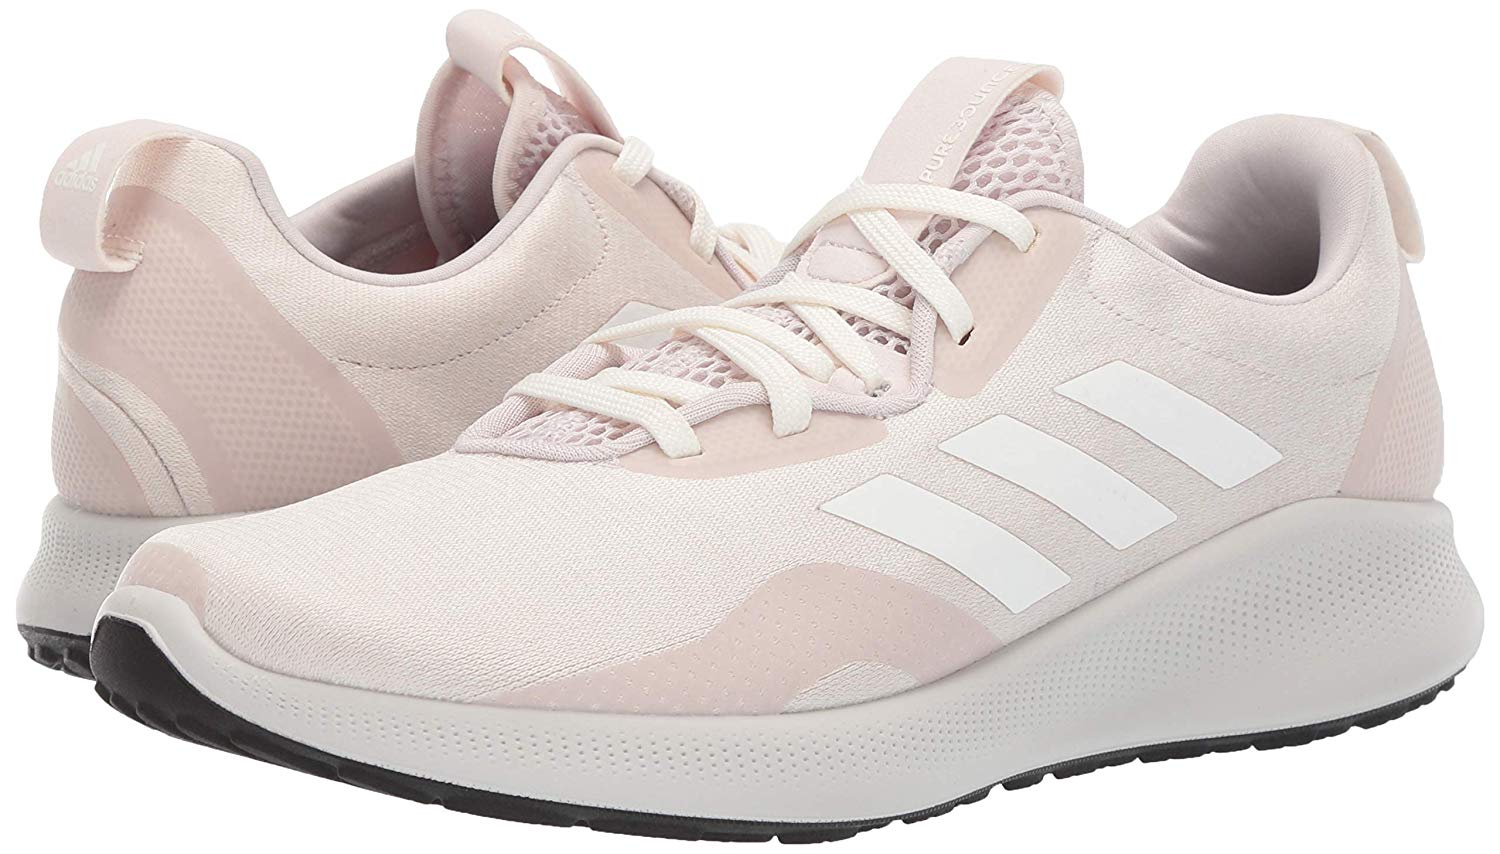 Adidas Womens Purebounc+ Road Running Shoes Orchid Tint/Cloud White/Pink 8.5